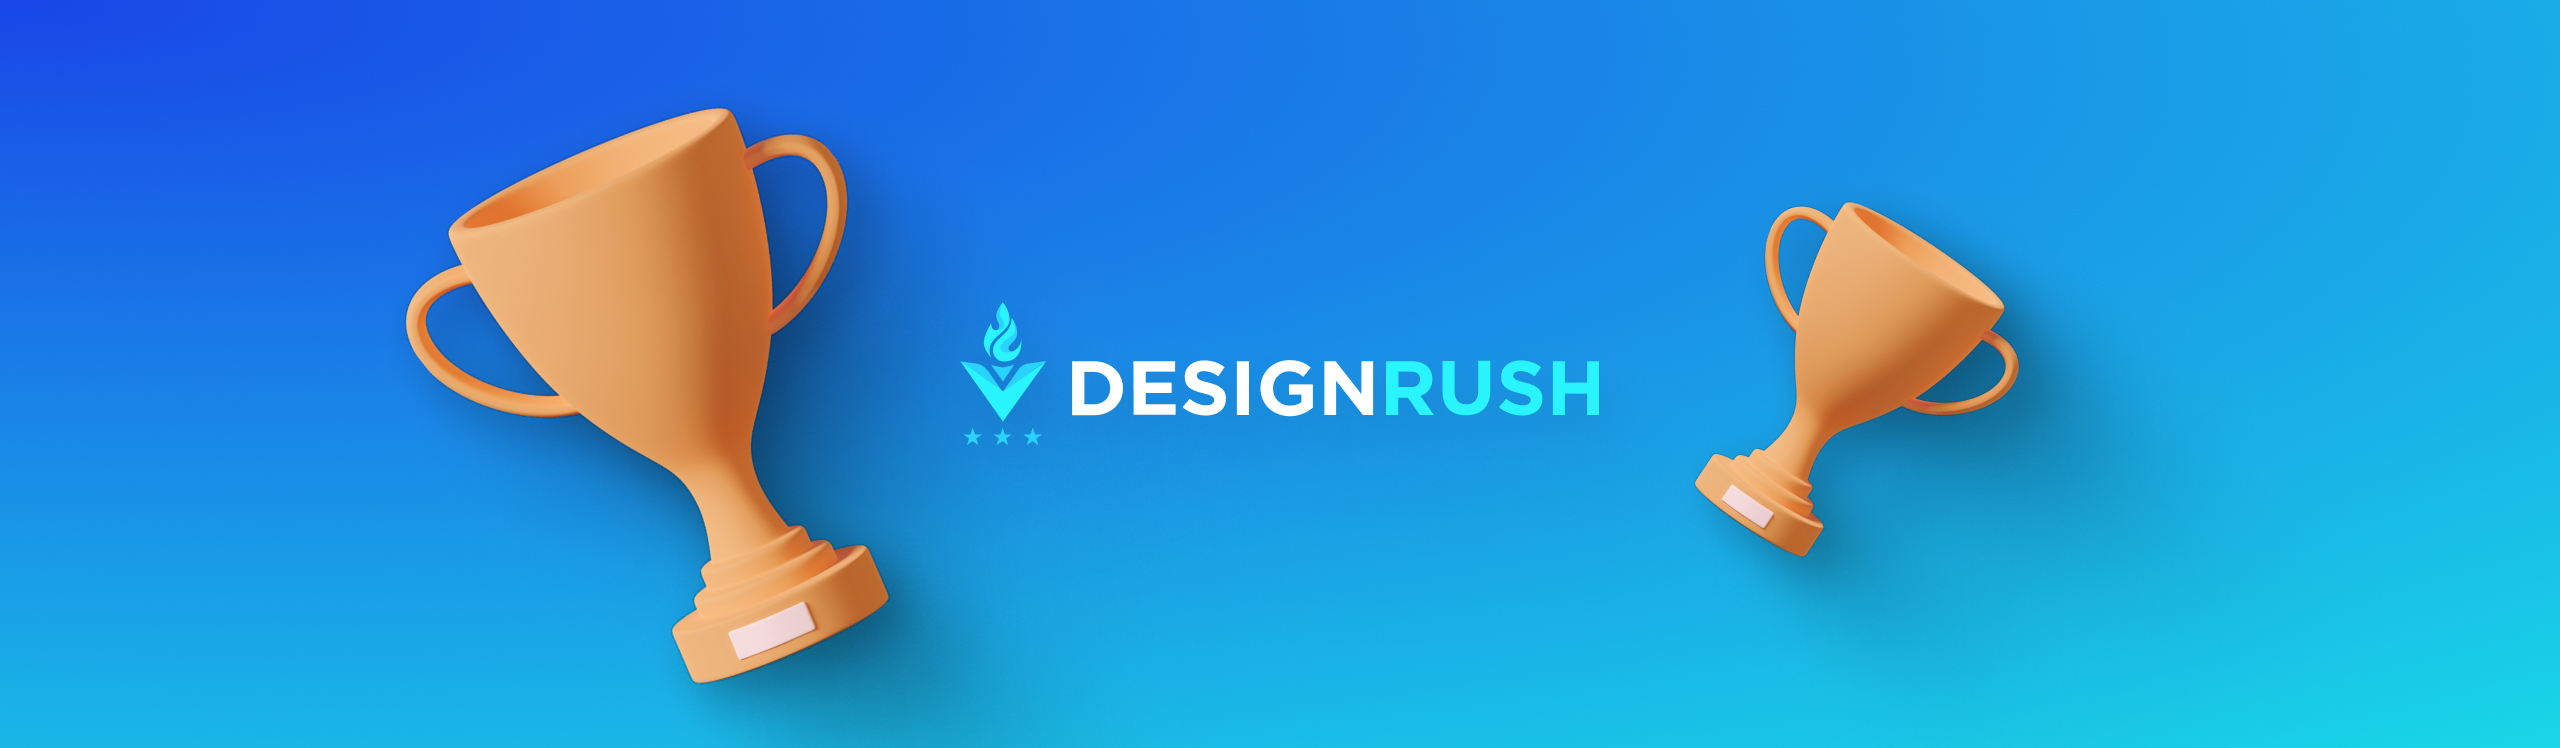 Diffco Acknowledged As Top Developer by DesignRush